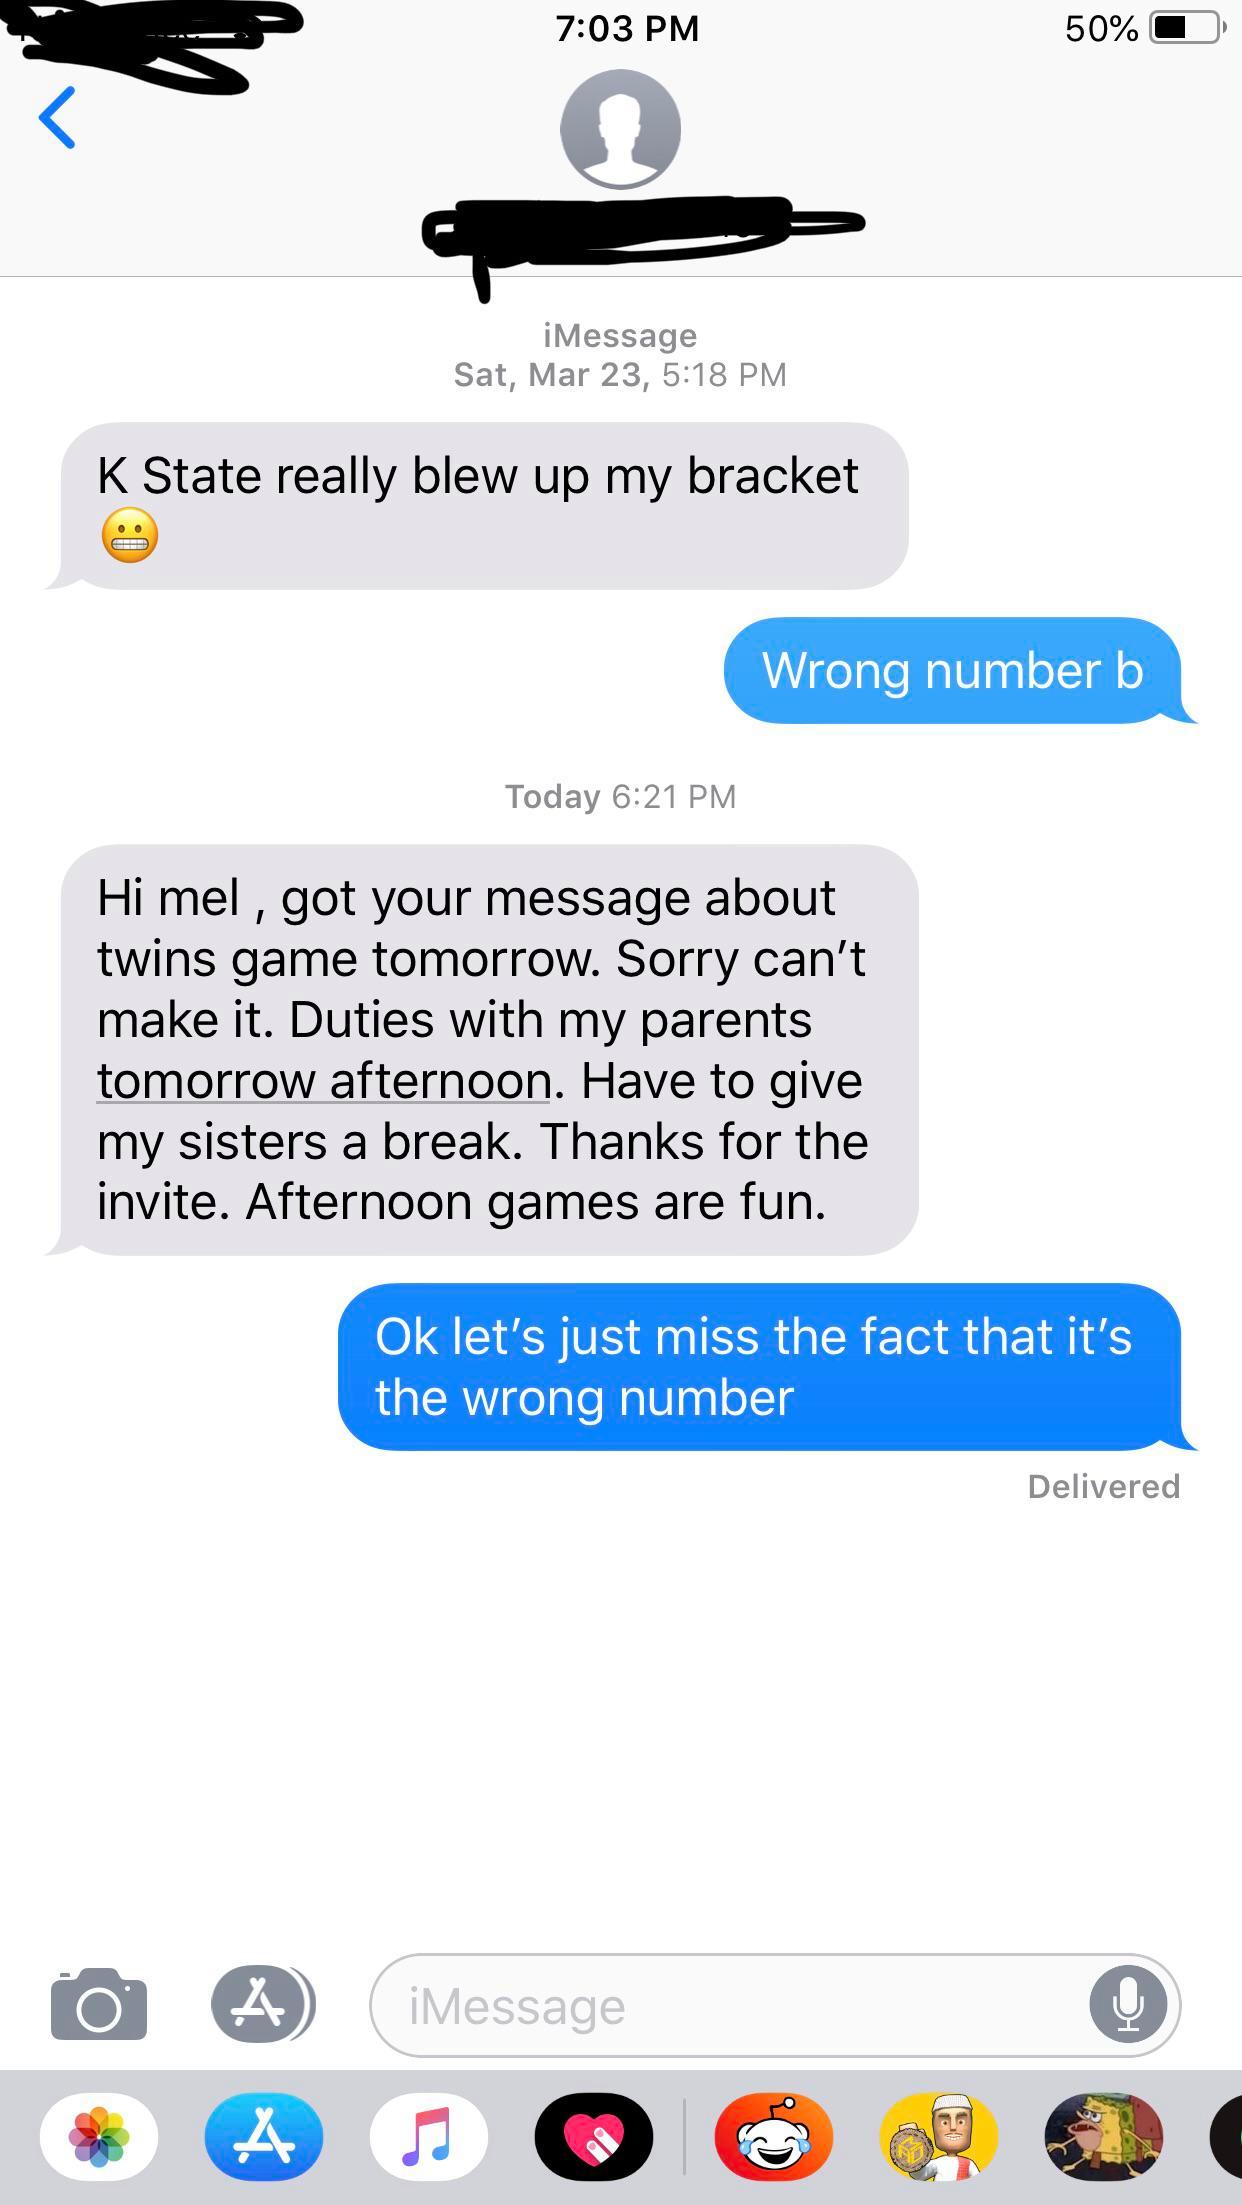 wrong number tell if someone is gay - 50% O iMessage Sat, Mar 23, K State really blew up my bracket Wrong number b Today Hi mel, got your message about twins game tomorrow. Sorry can't make it. Duties with my parents tomorrow afternoon. Have to give my si